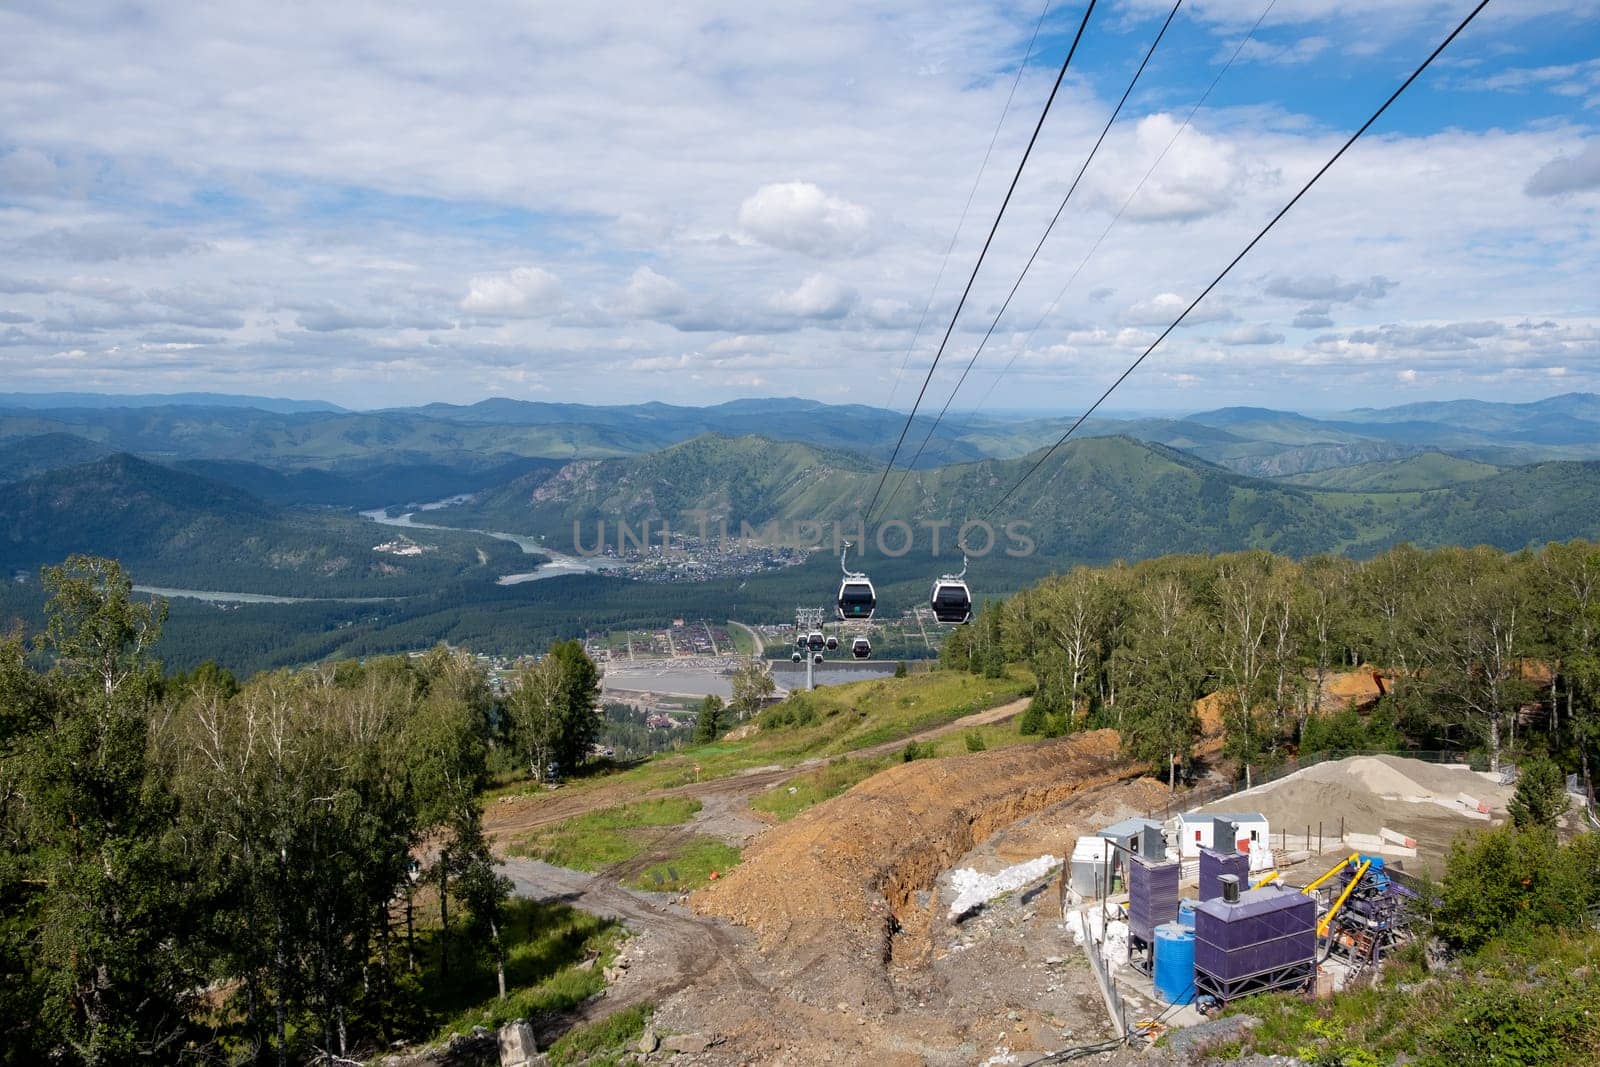 View from the mountain of the cable car with cabins. There is construction going on underneath them. Cable car trip to viewpoints in mountains. Tourists enjoy beautiful views and experience exciting.